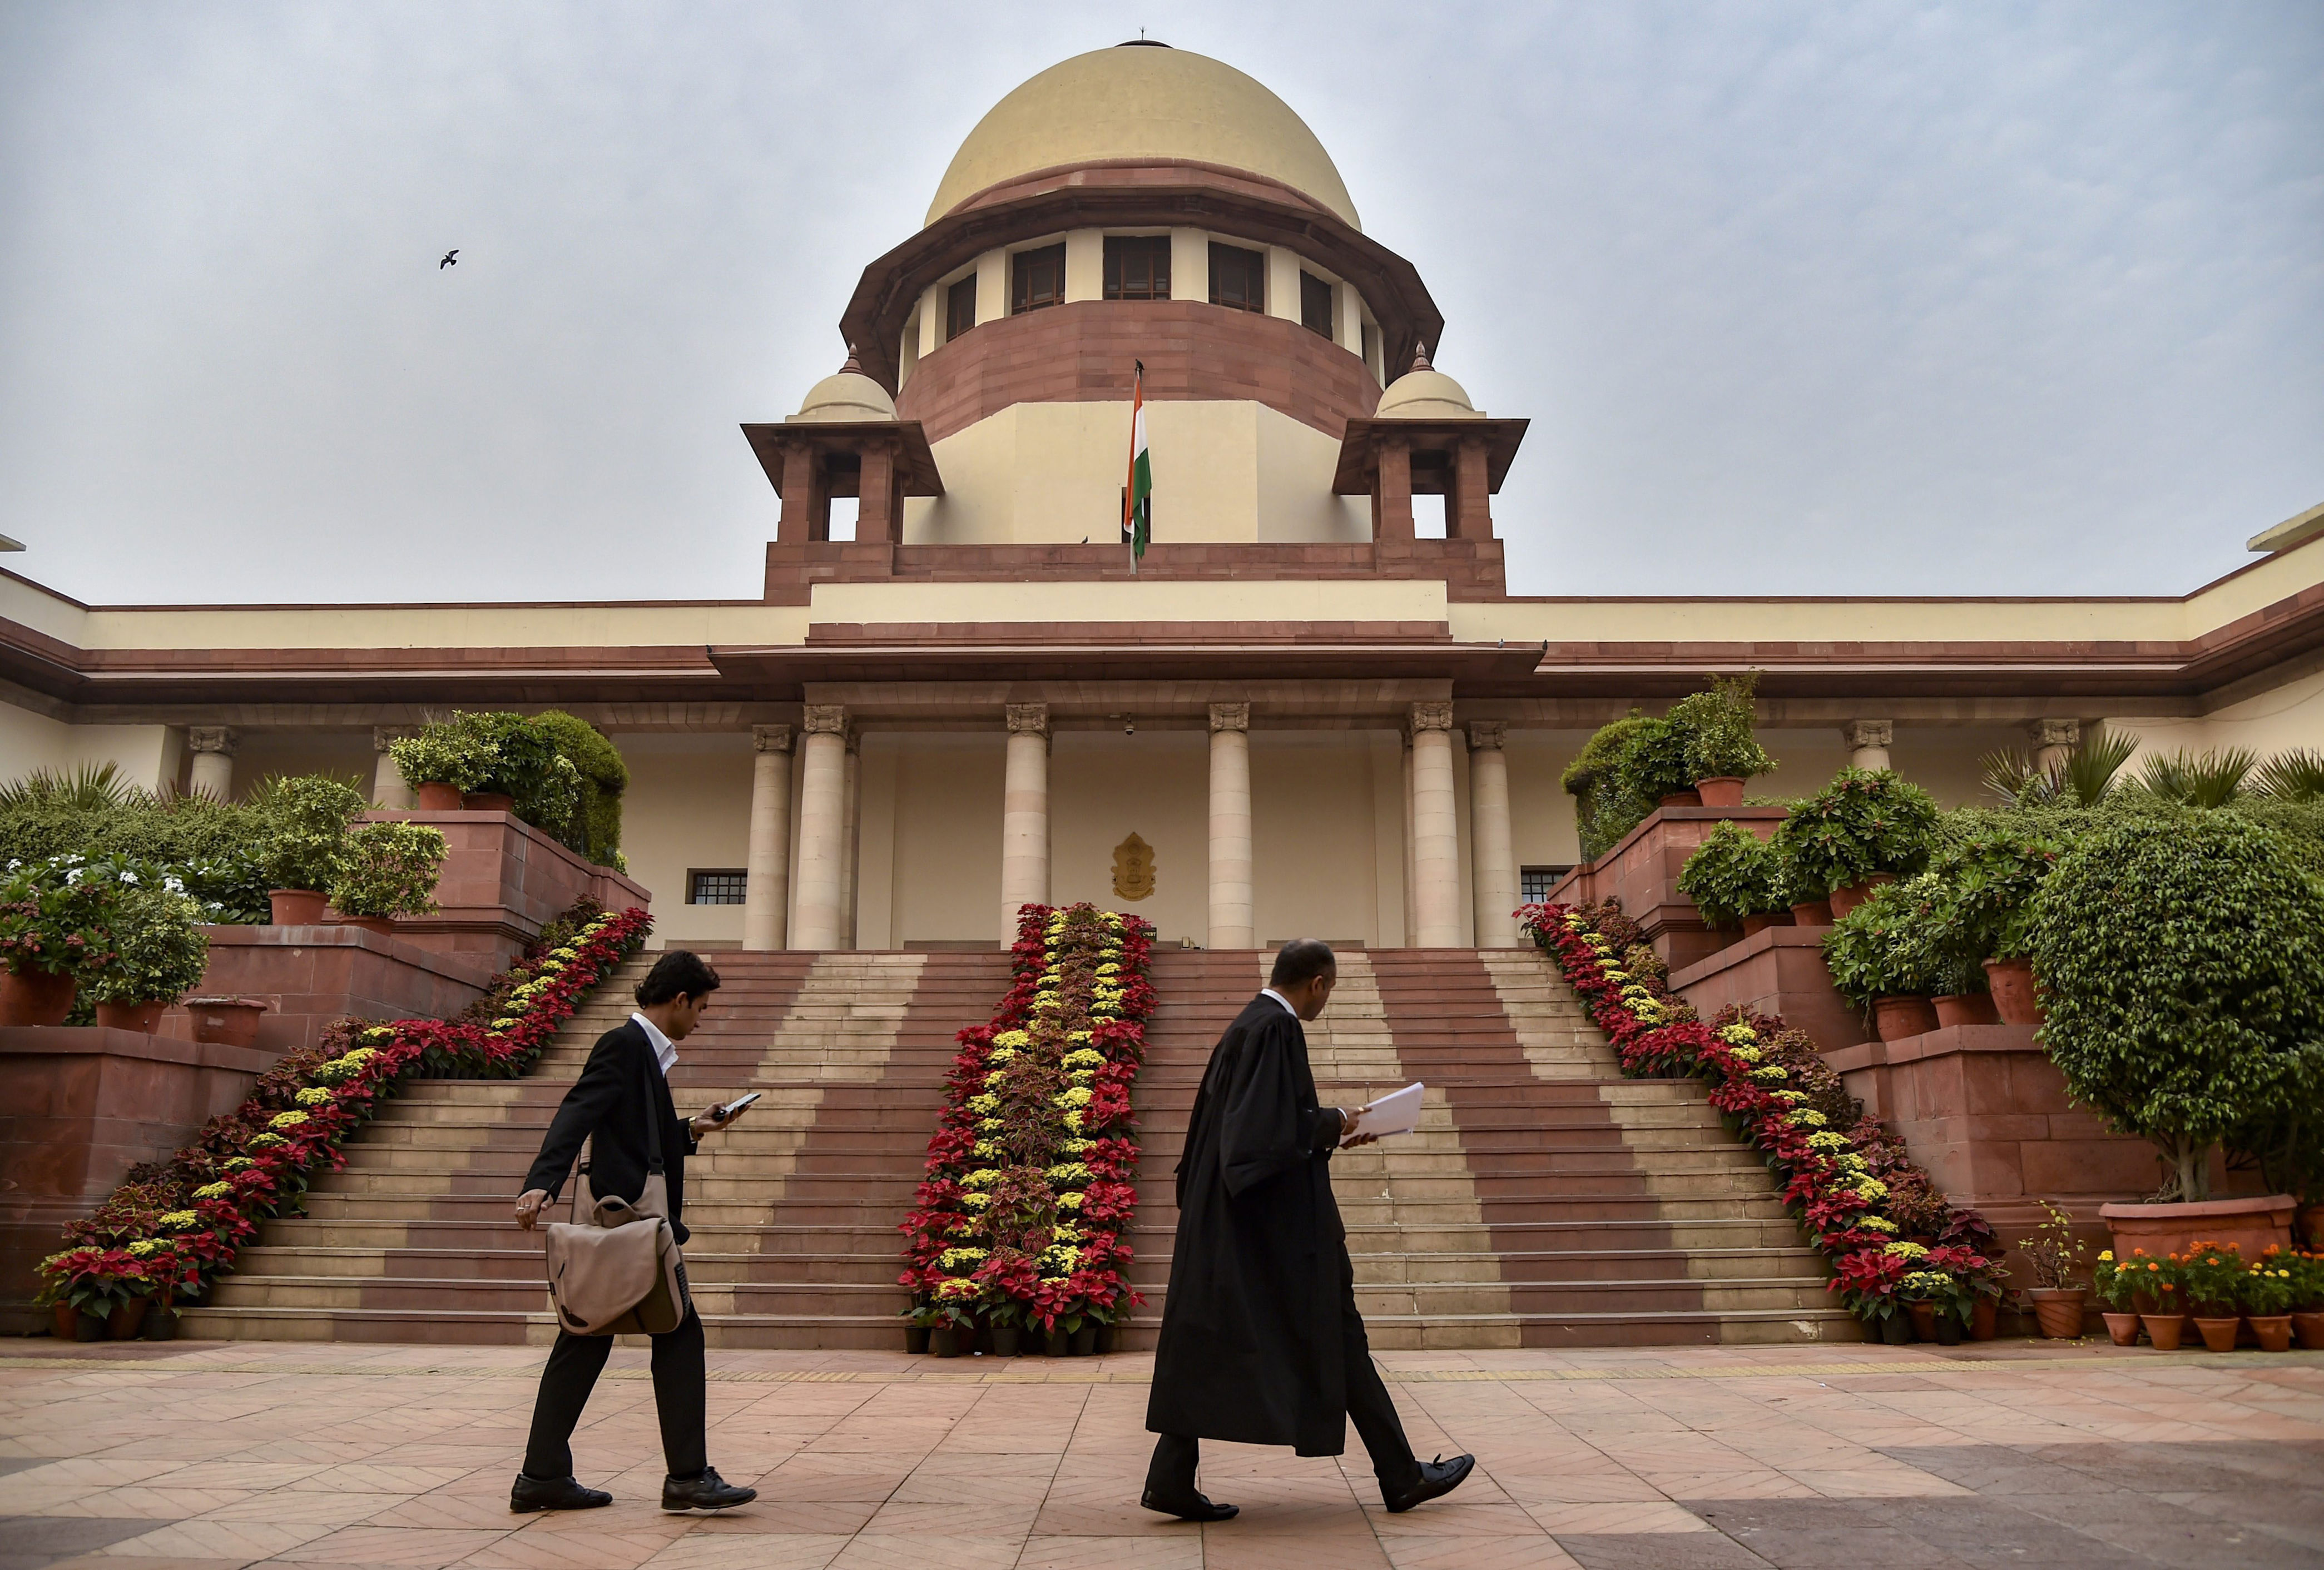 sc permits iocl, arcelormittal firm to start arbitration to resolve dispute over essar steel